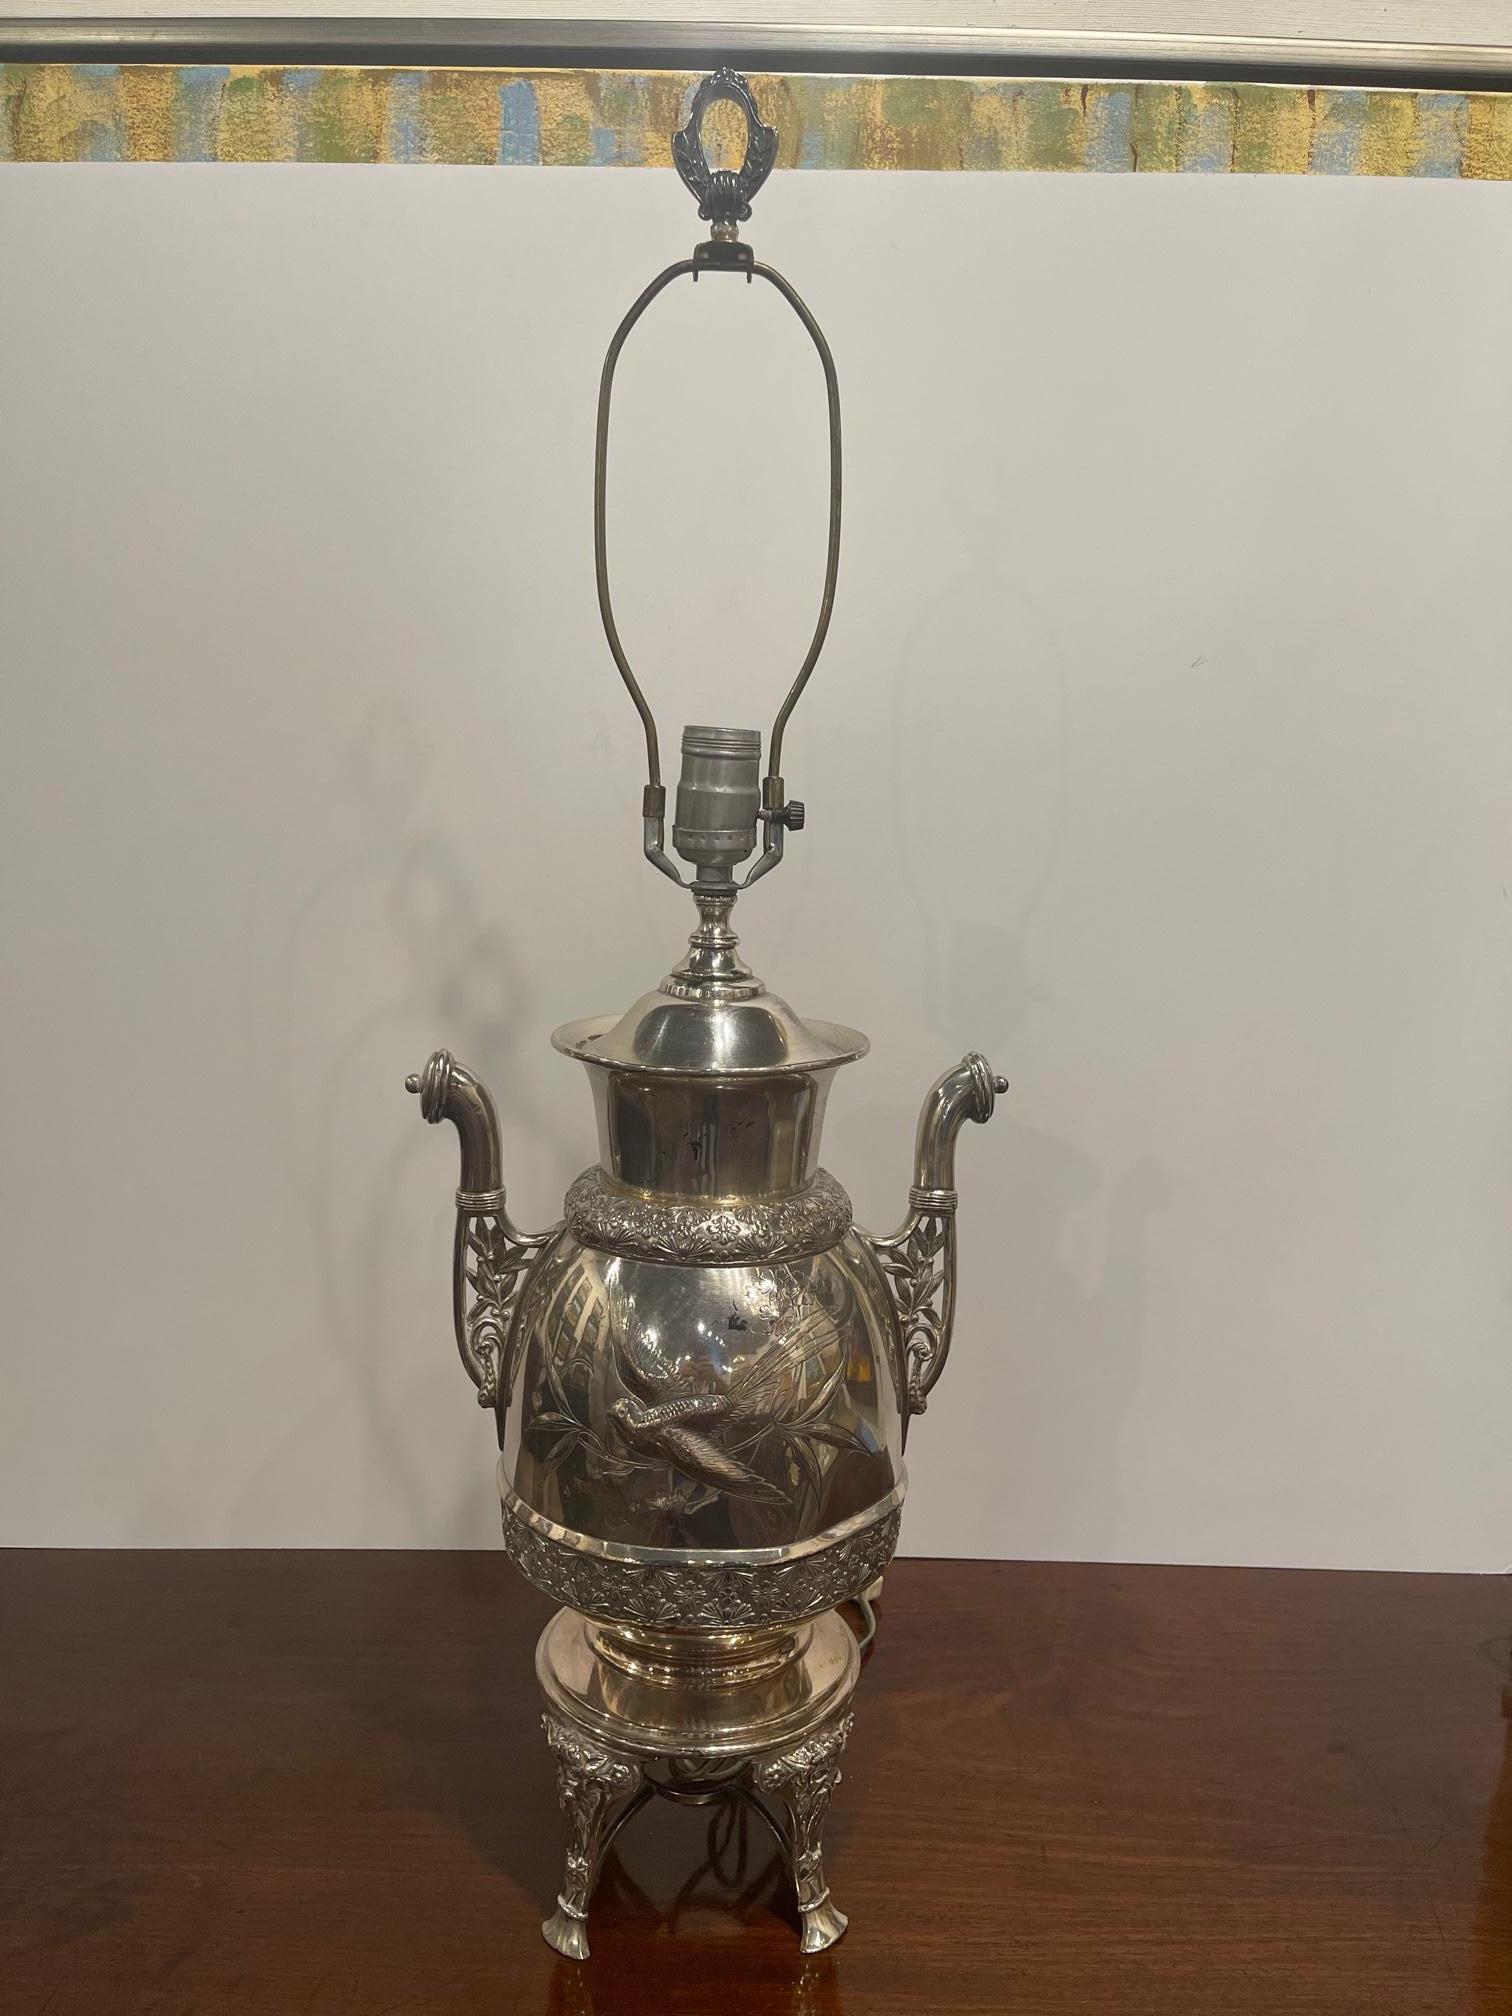 Silver plate hot water urn adapted as a lamp, 20th century. 20.25